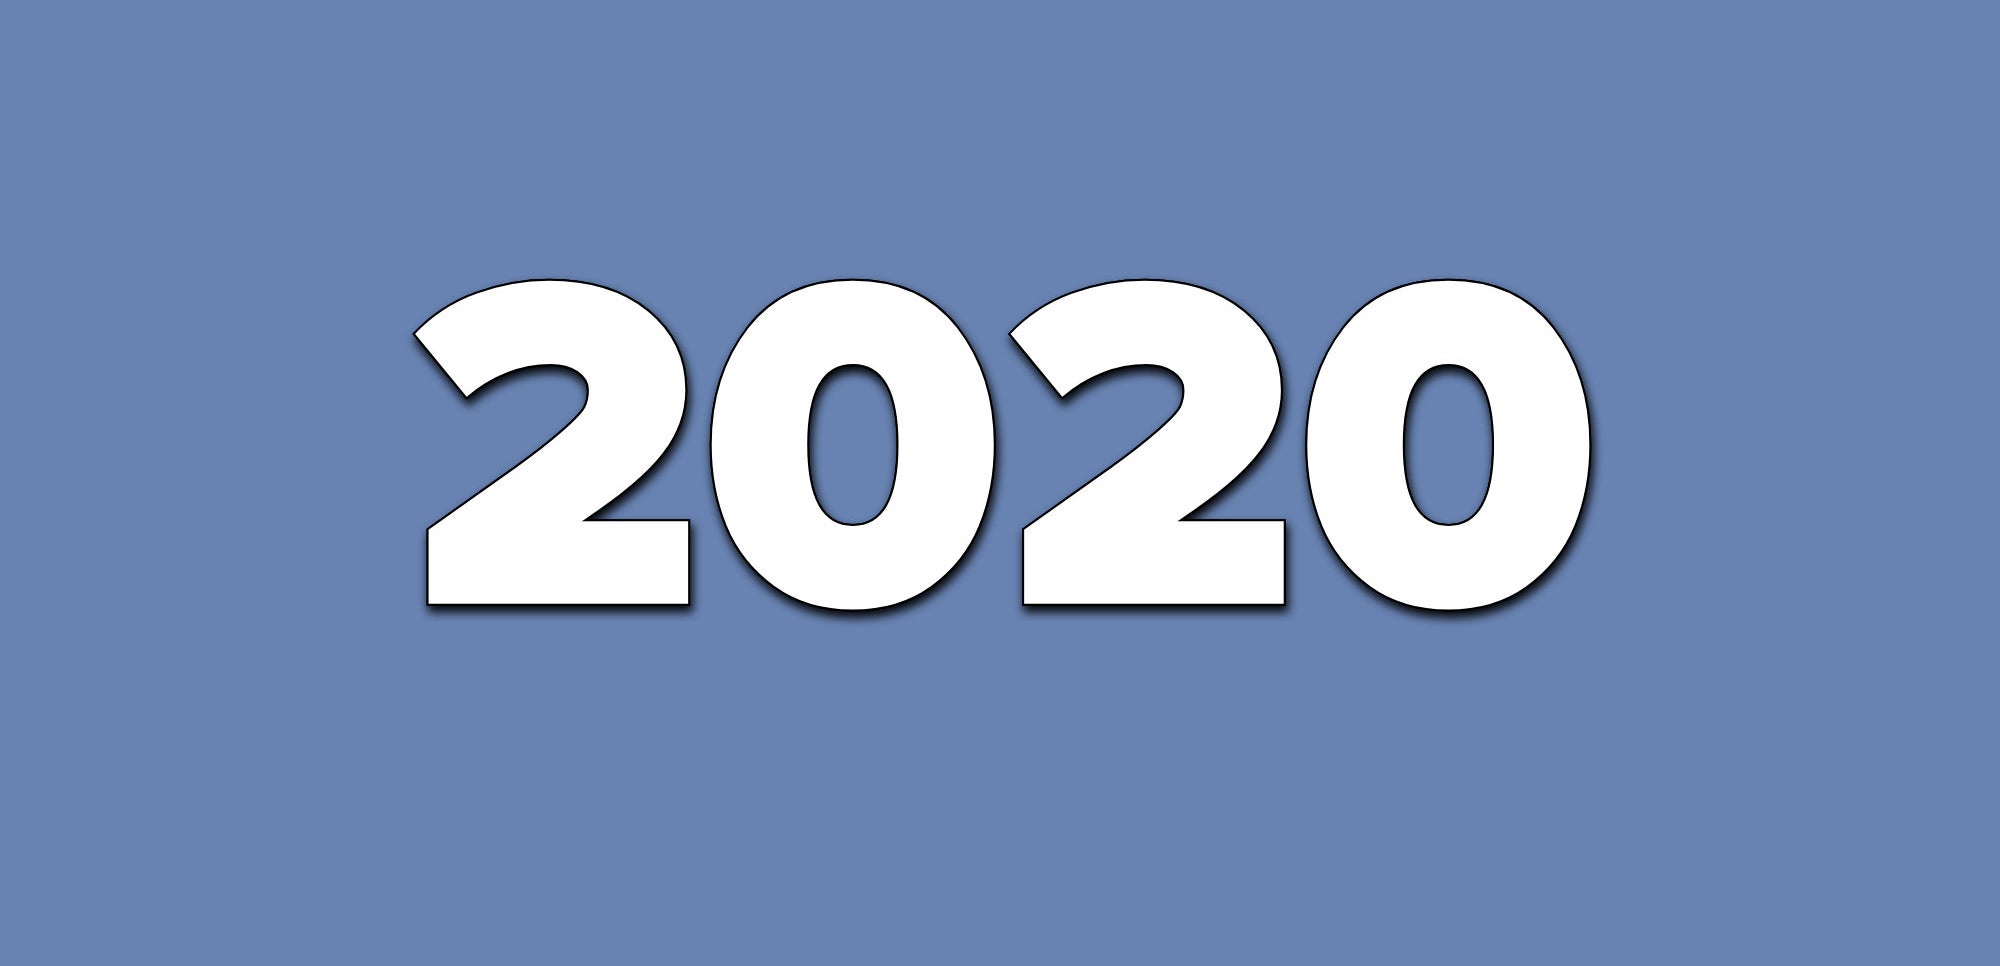 A blue background with text that says 2020